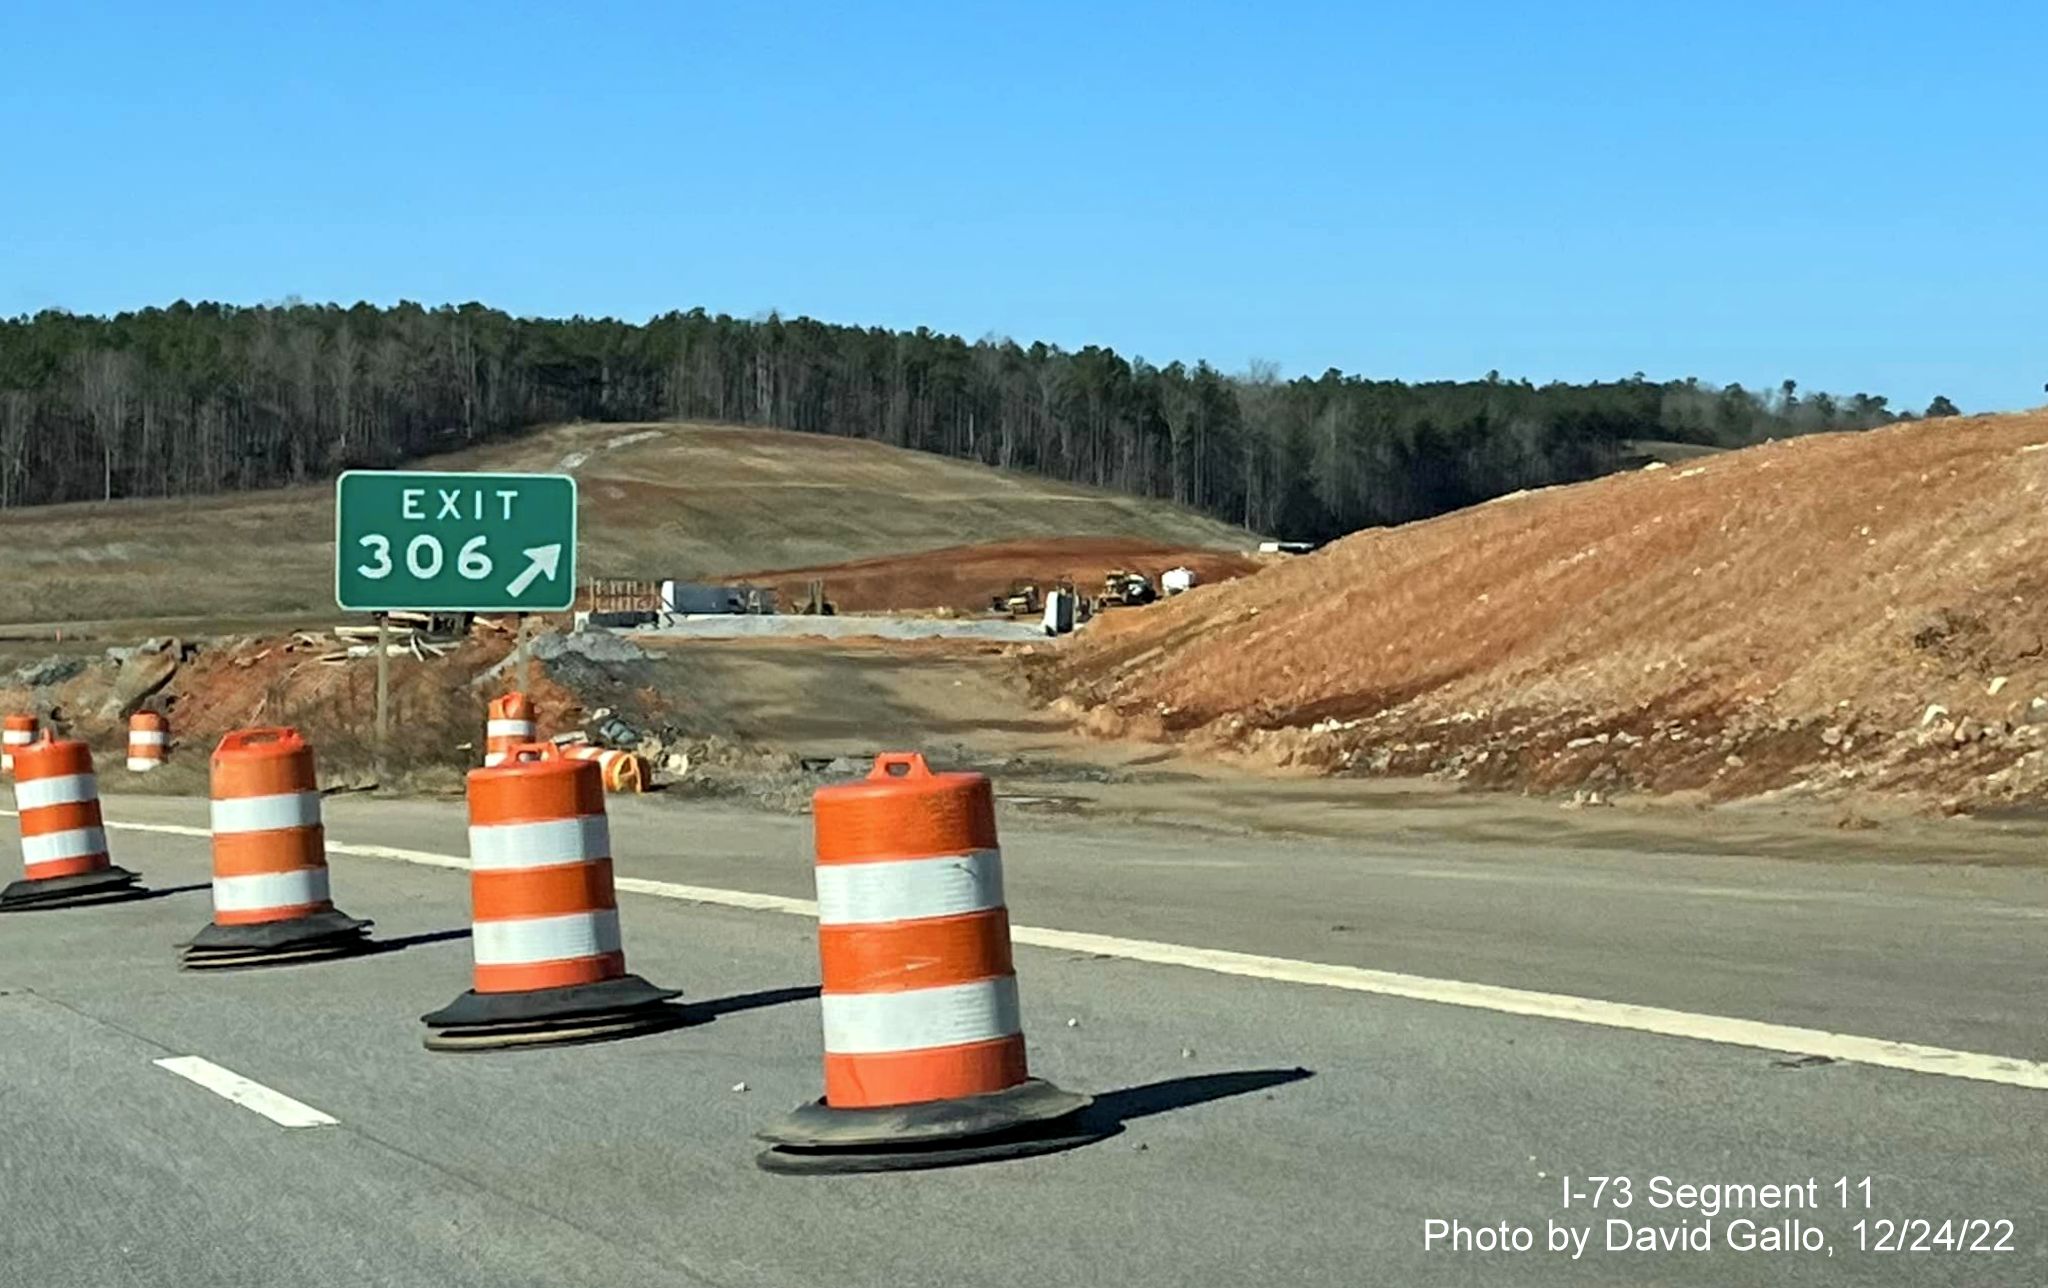 Image of US 74 West in I-73/I-74 Rockingham Bypass construction zone at former Business US 74 exit, 
                                            photo by David Gallo, December 2022